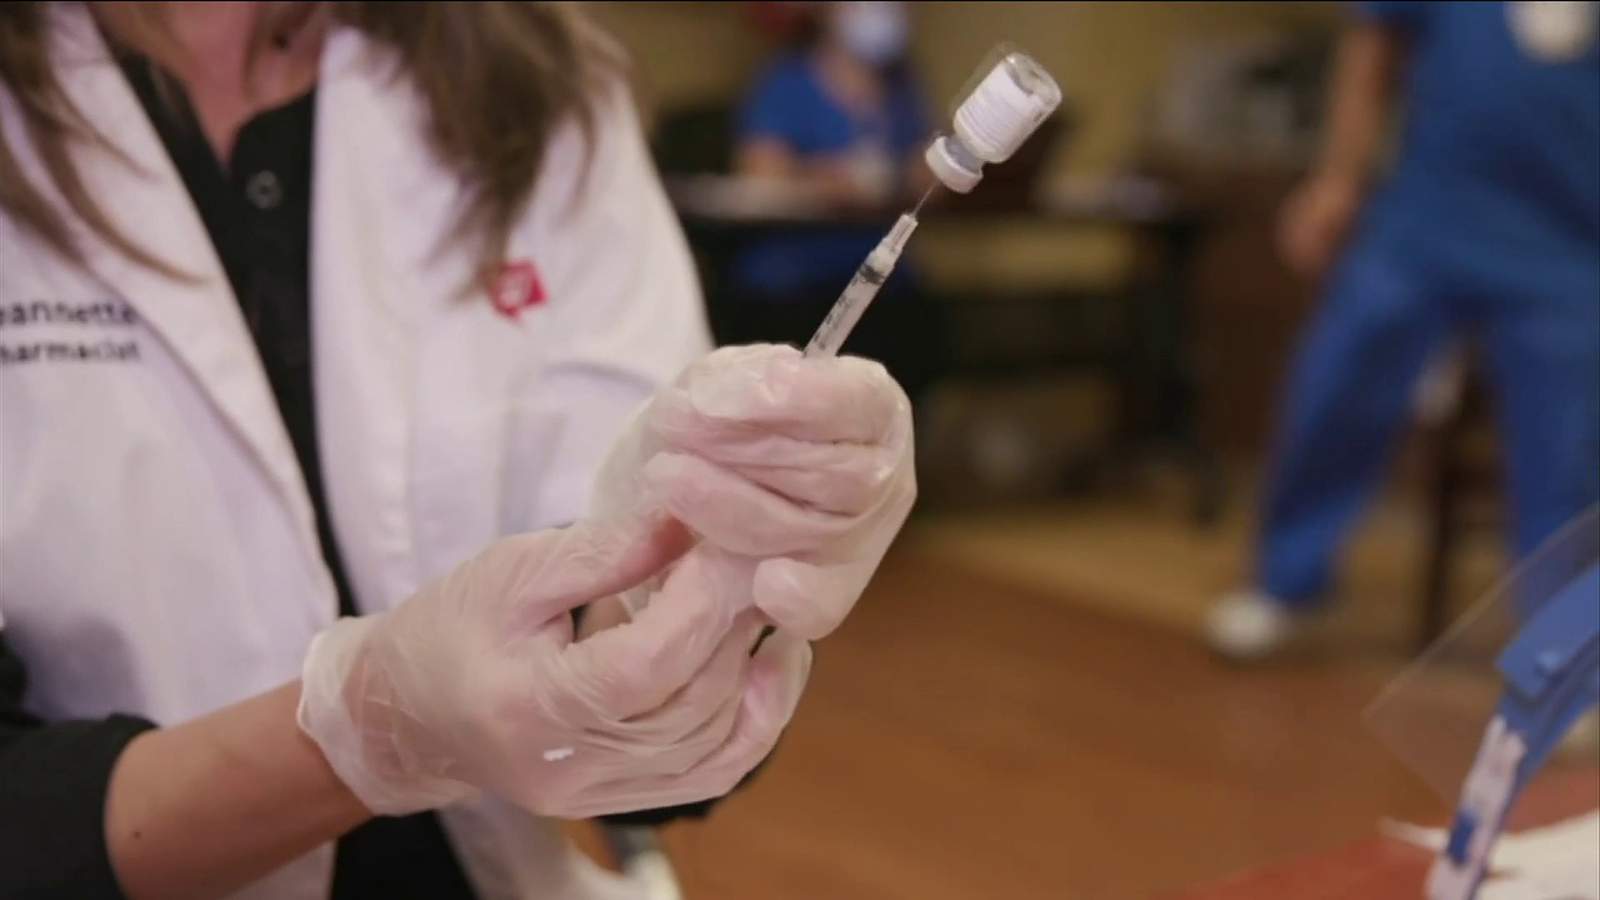 6 ways Michigan residents can sign up for COVID-19 vaccine